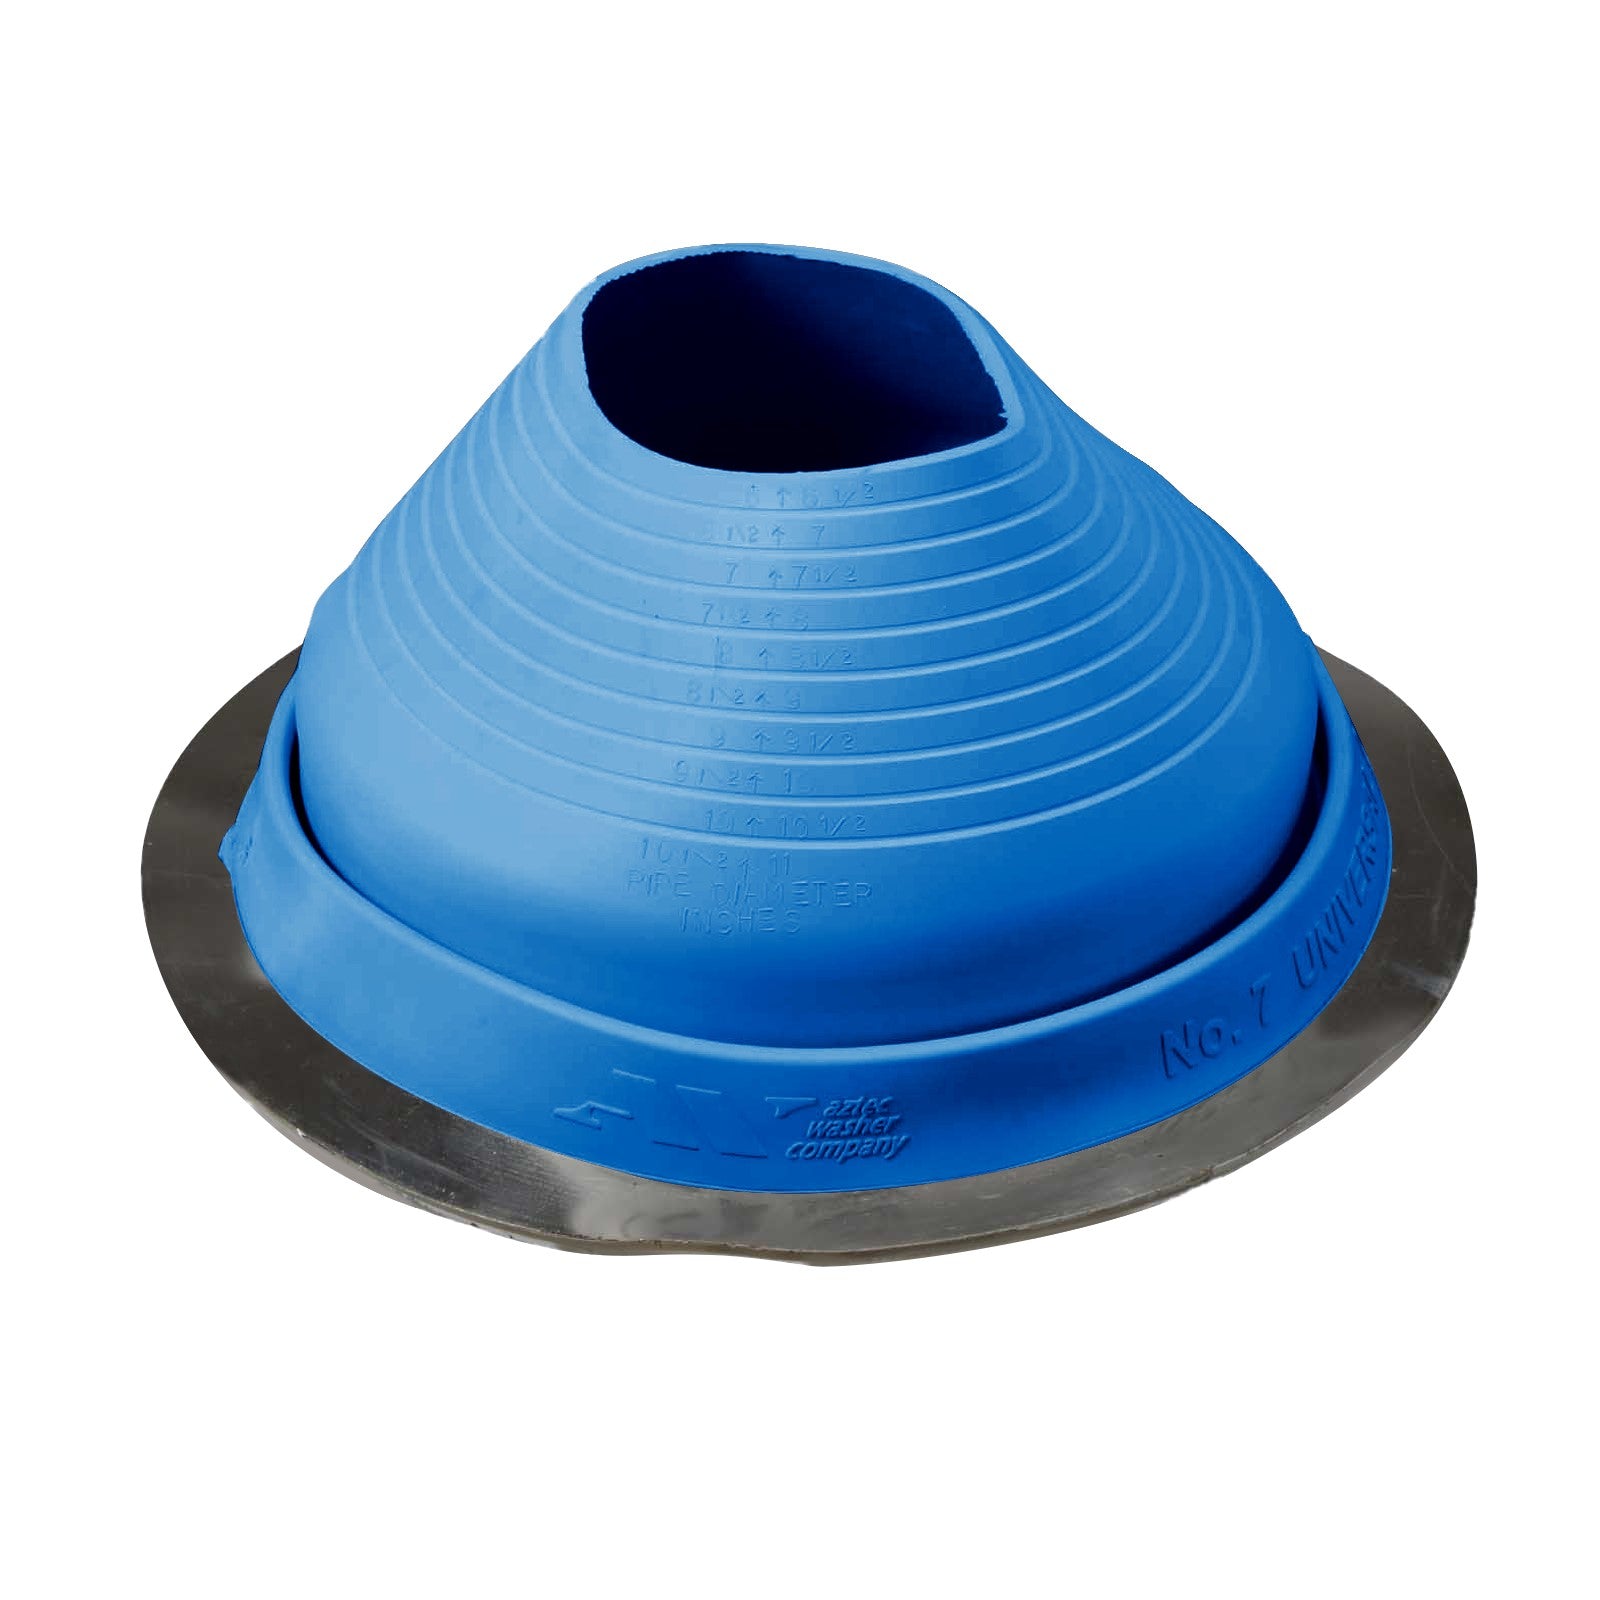 #7 Roofjack Round EPDM Pipe Flashing Boot Light Blue